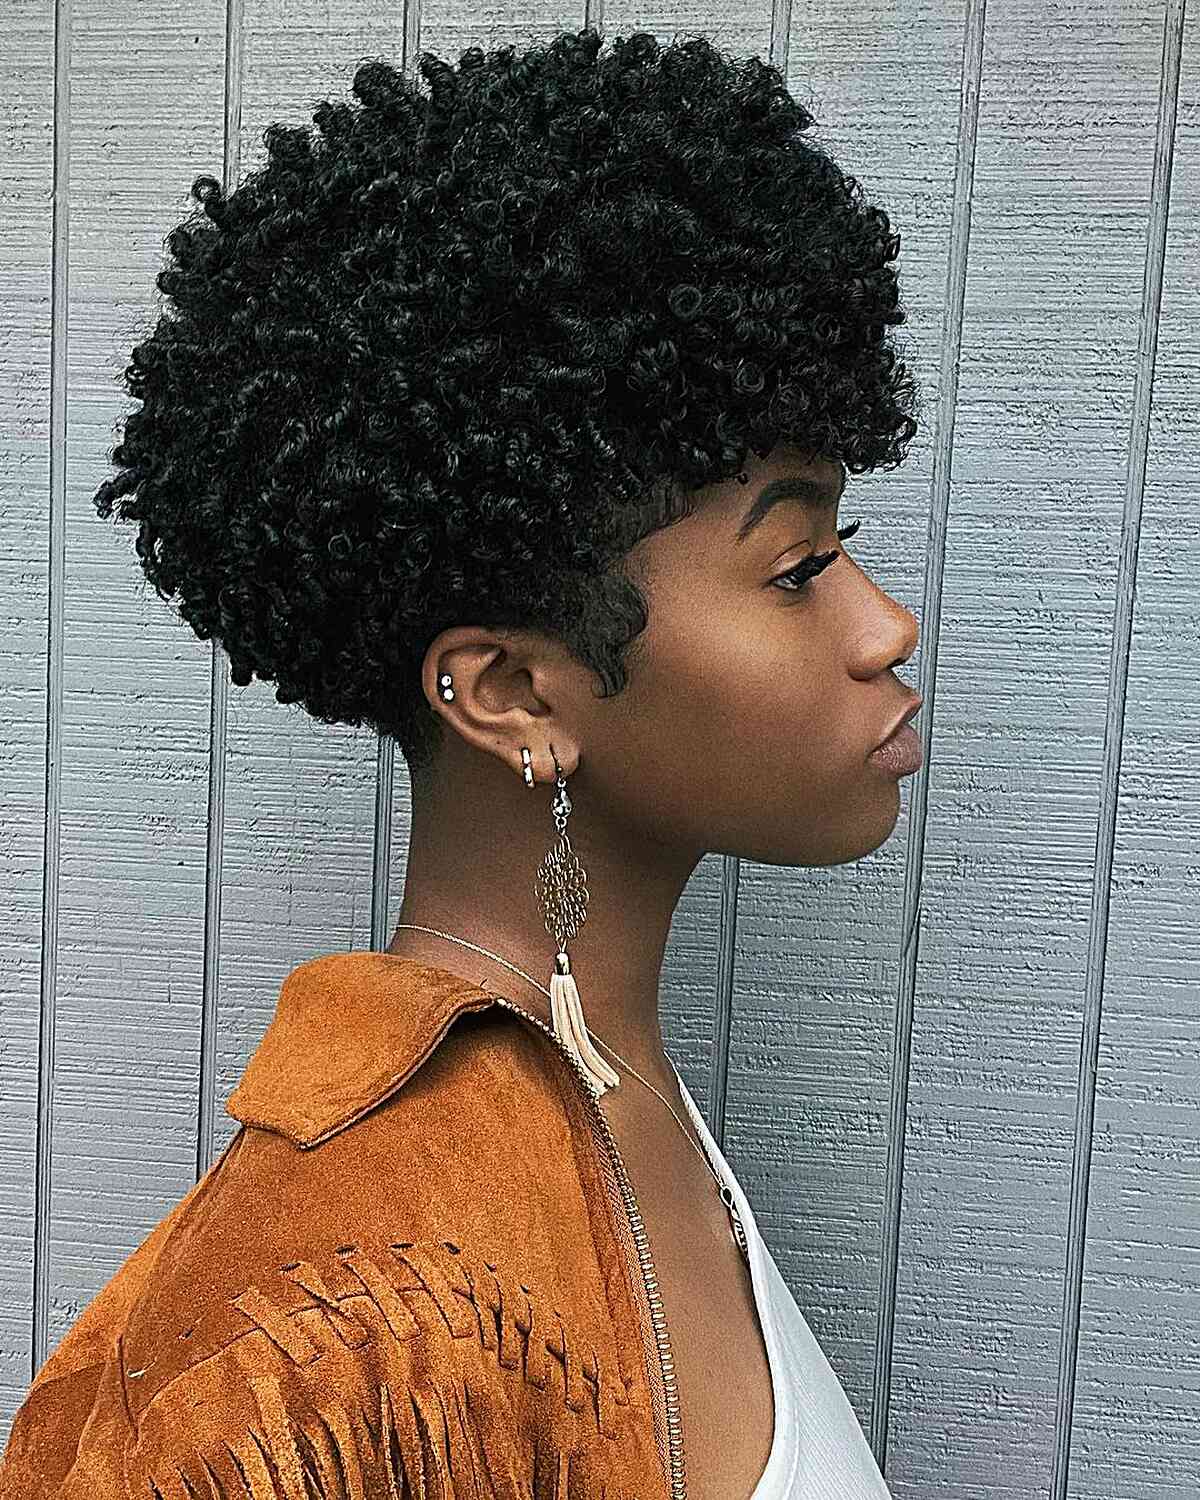 Hairstyle Archives - Page 7 of 13 - Ethnic Fashion Inspirations!